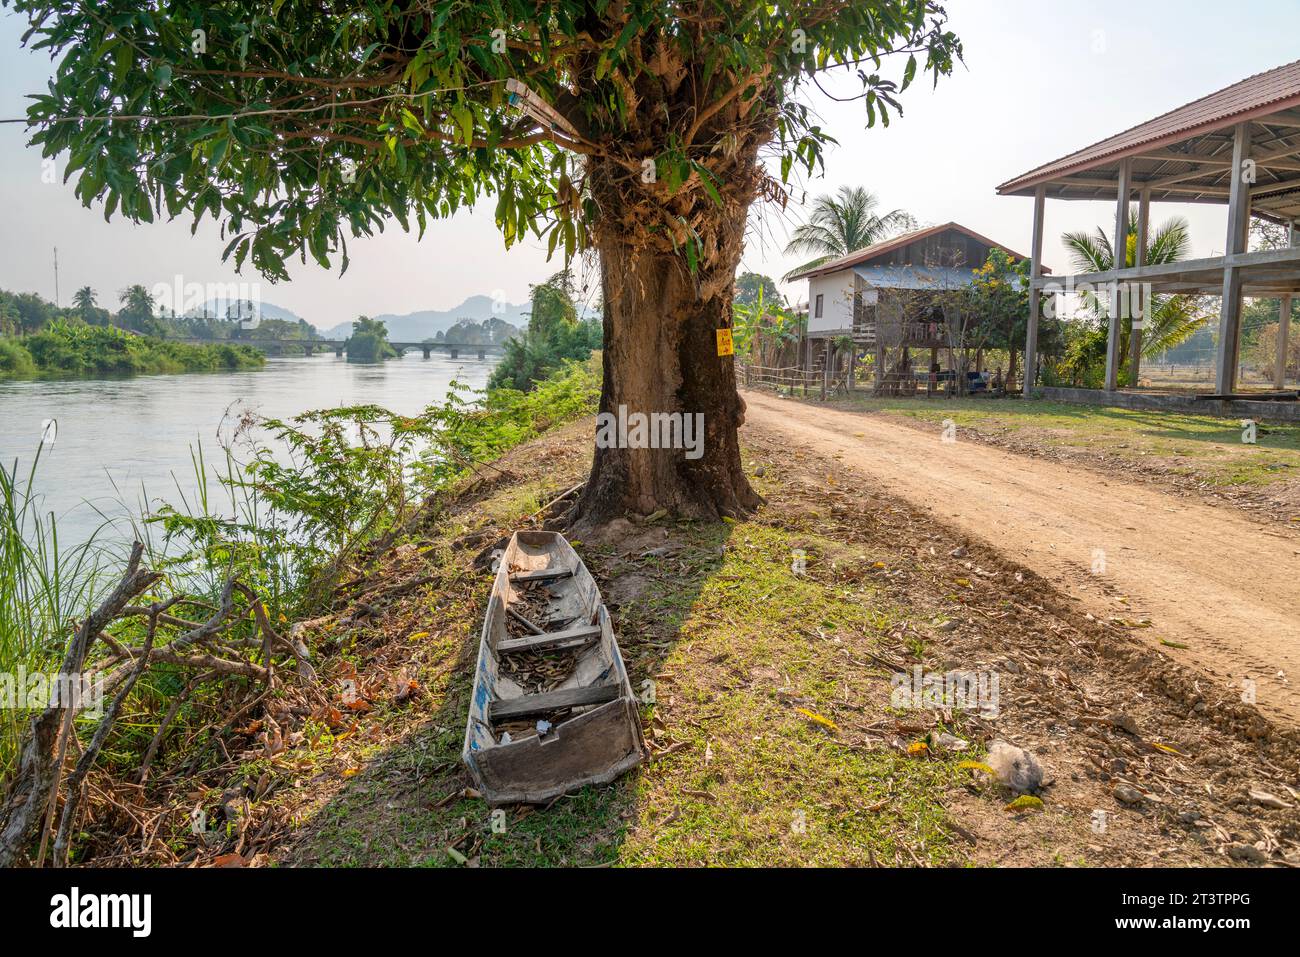 Peaceful rural river scene,historic old French-colonial Don Det-Don Khon bridge in the distance,narrow dirt road running past a leafy tree overhanging Stock Photo